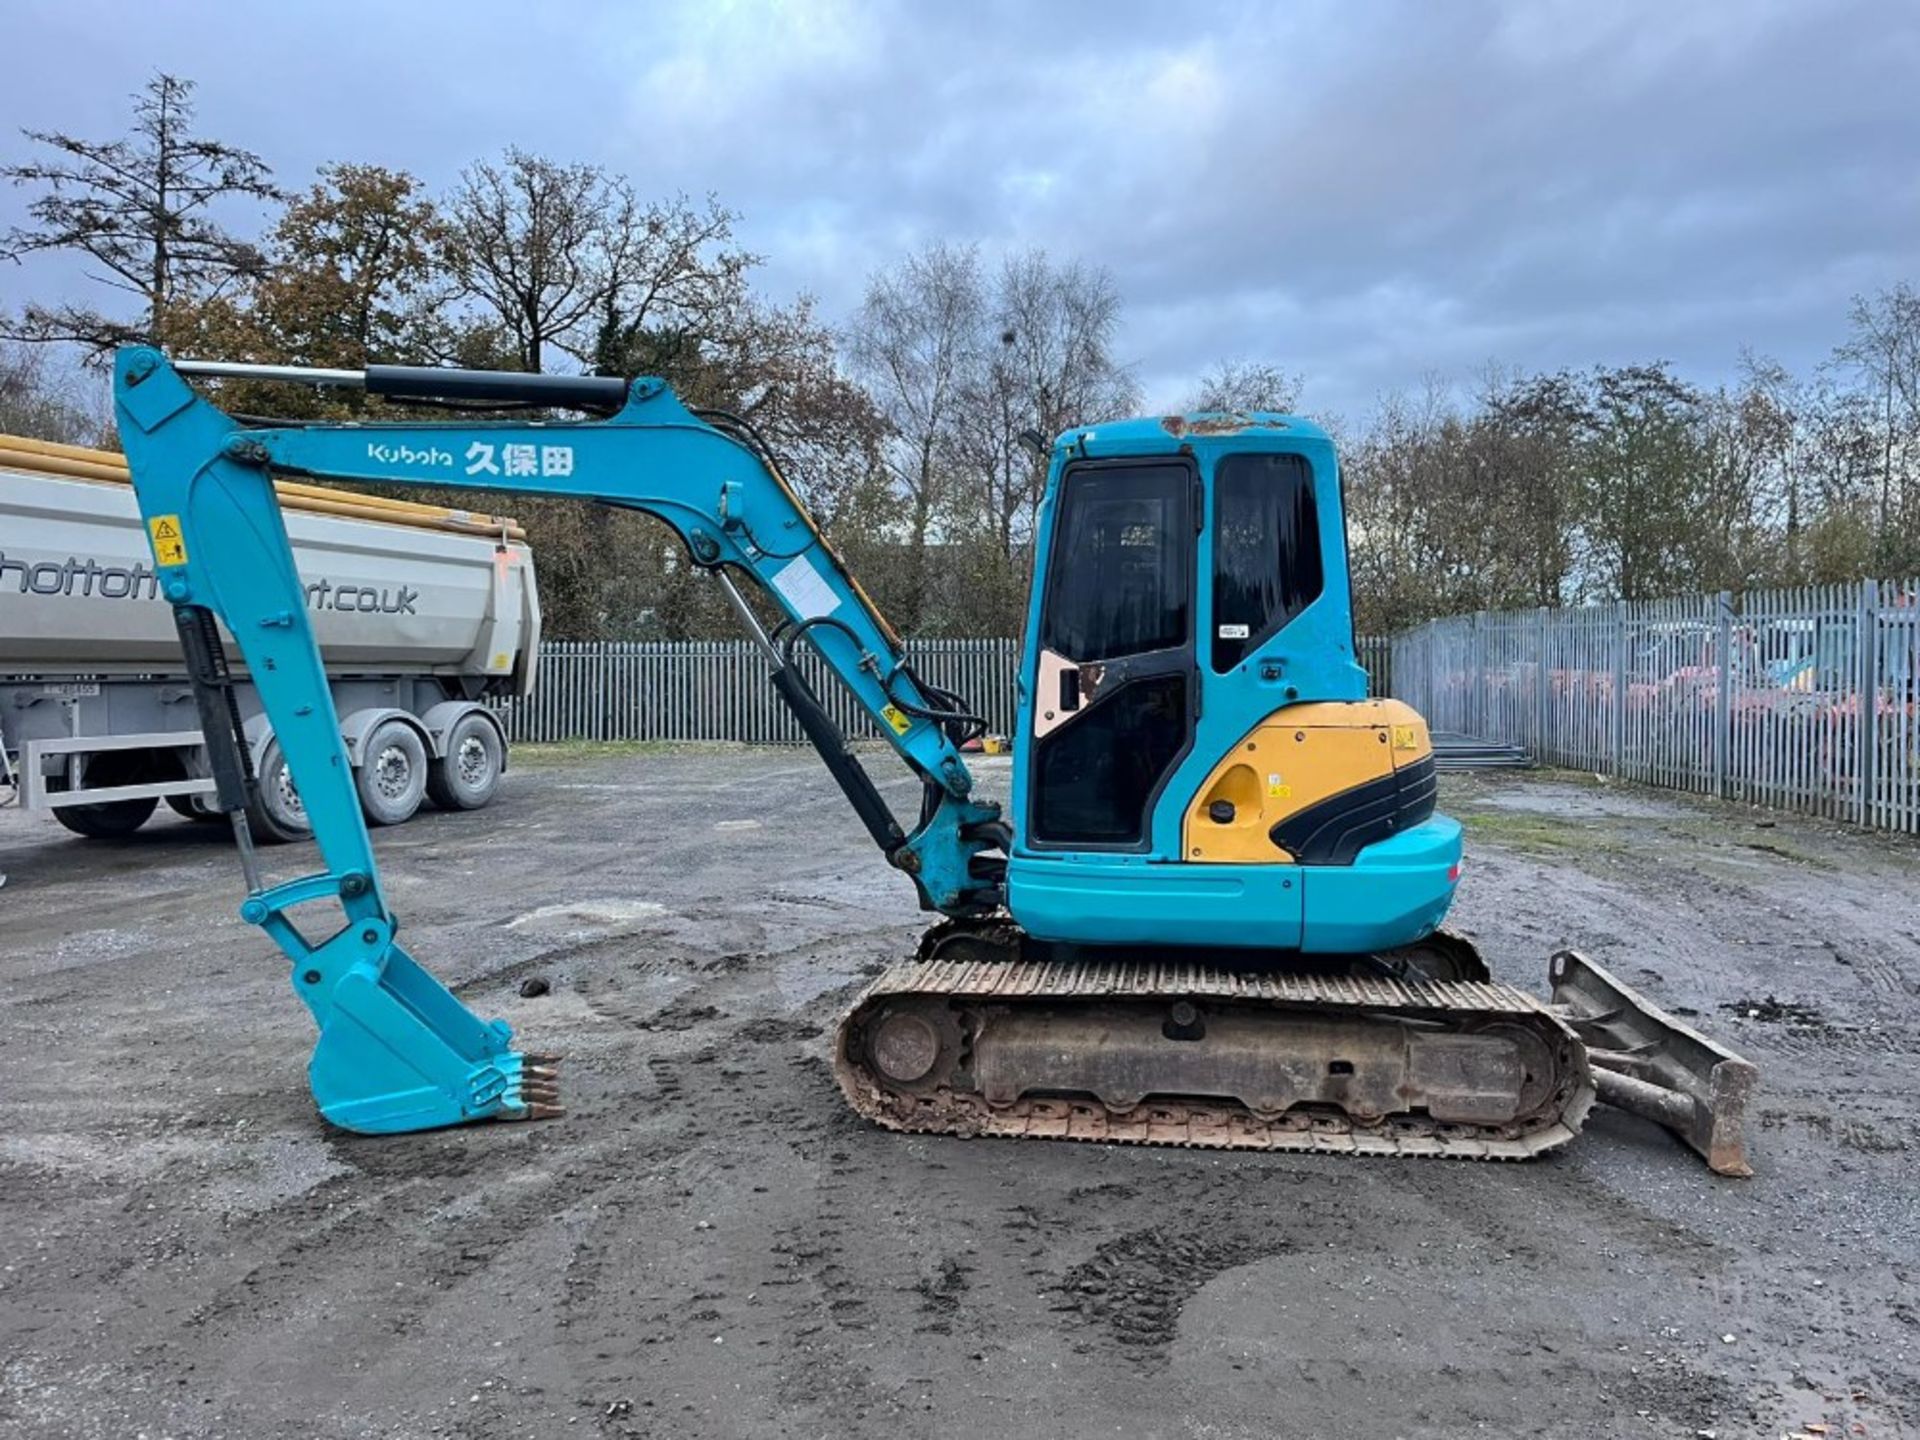 KUBOTA KX161 DIGGER 2015 ON THE PLATE HARD TO START POSSIBLE STARTER ISSUES